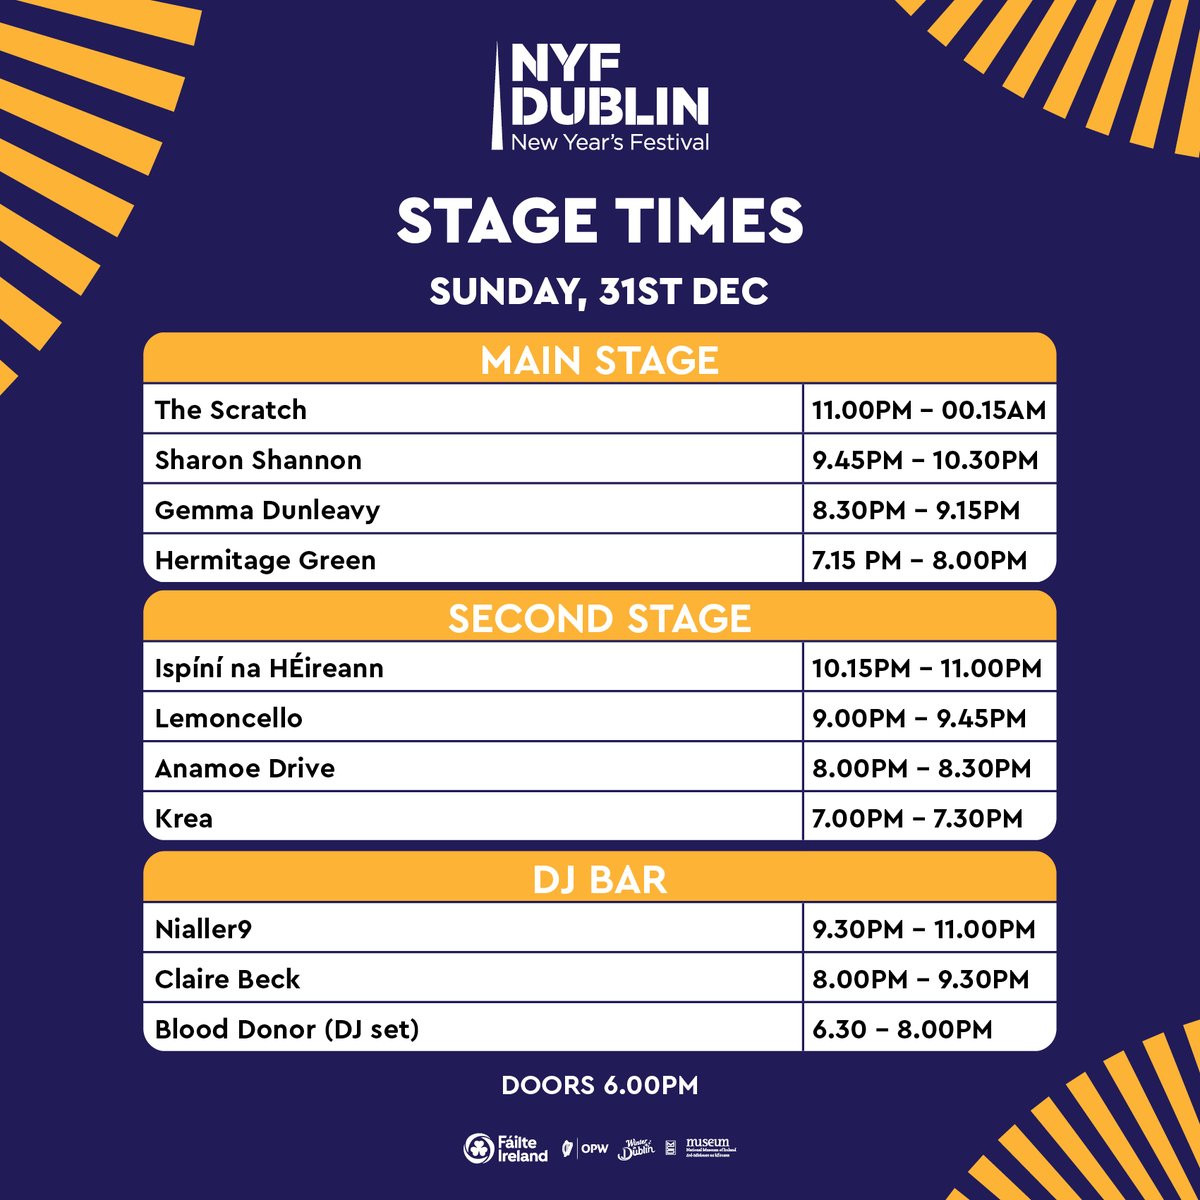 🎆 New Year's Eve is upon us! Today’s events are: ⭕️ @NMIreland Collins Barracks & Dublin Castle await! 🙌 Join us for an epic day as we welcome 2024 with open arms! #TheOnlyPlaceToBe #NYFDublin